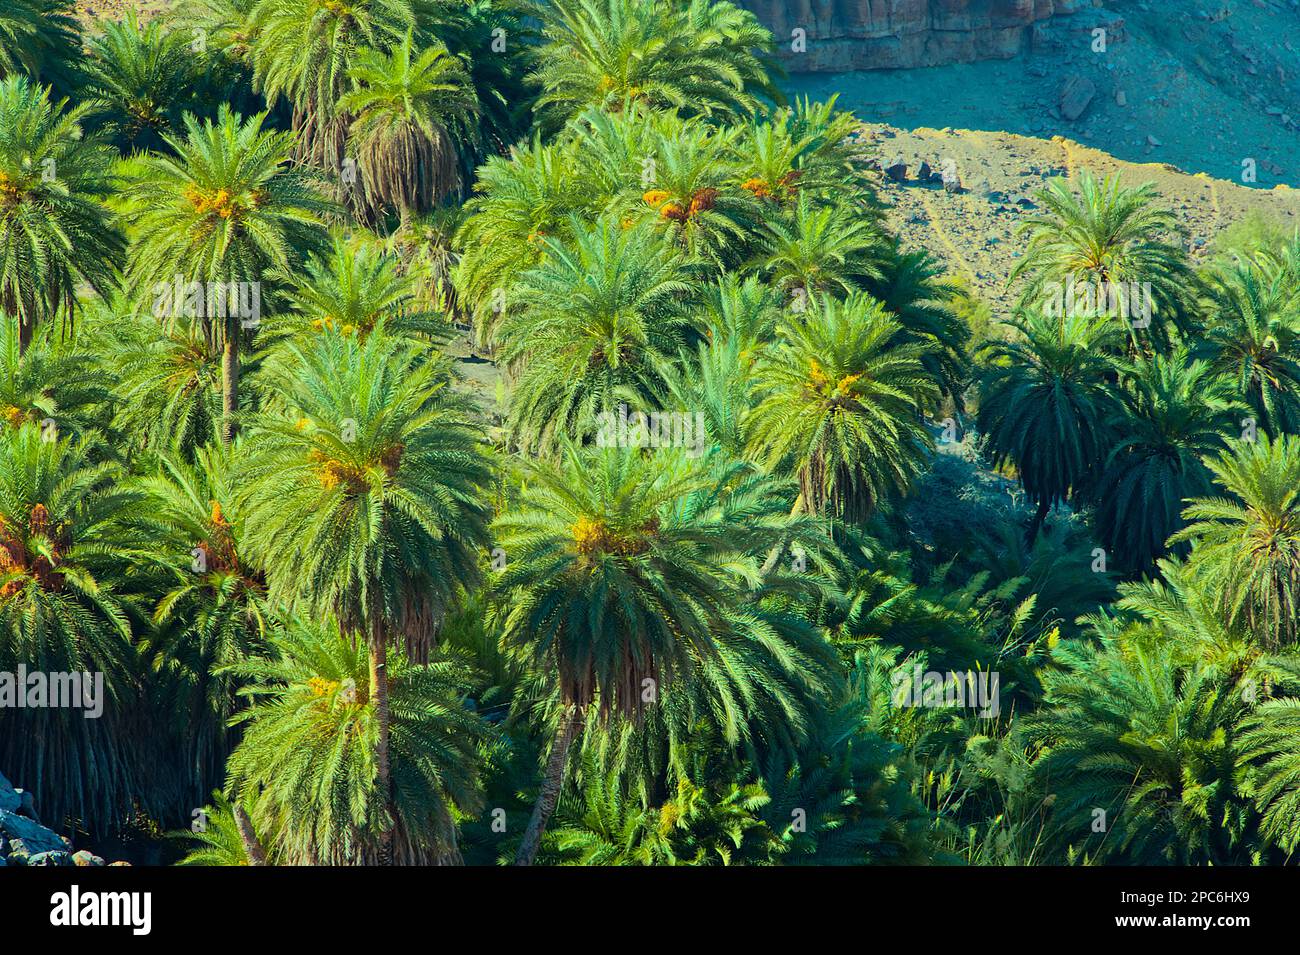 Green oasis with many palm trees surrounded by the desert Stock Photo